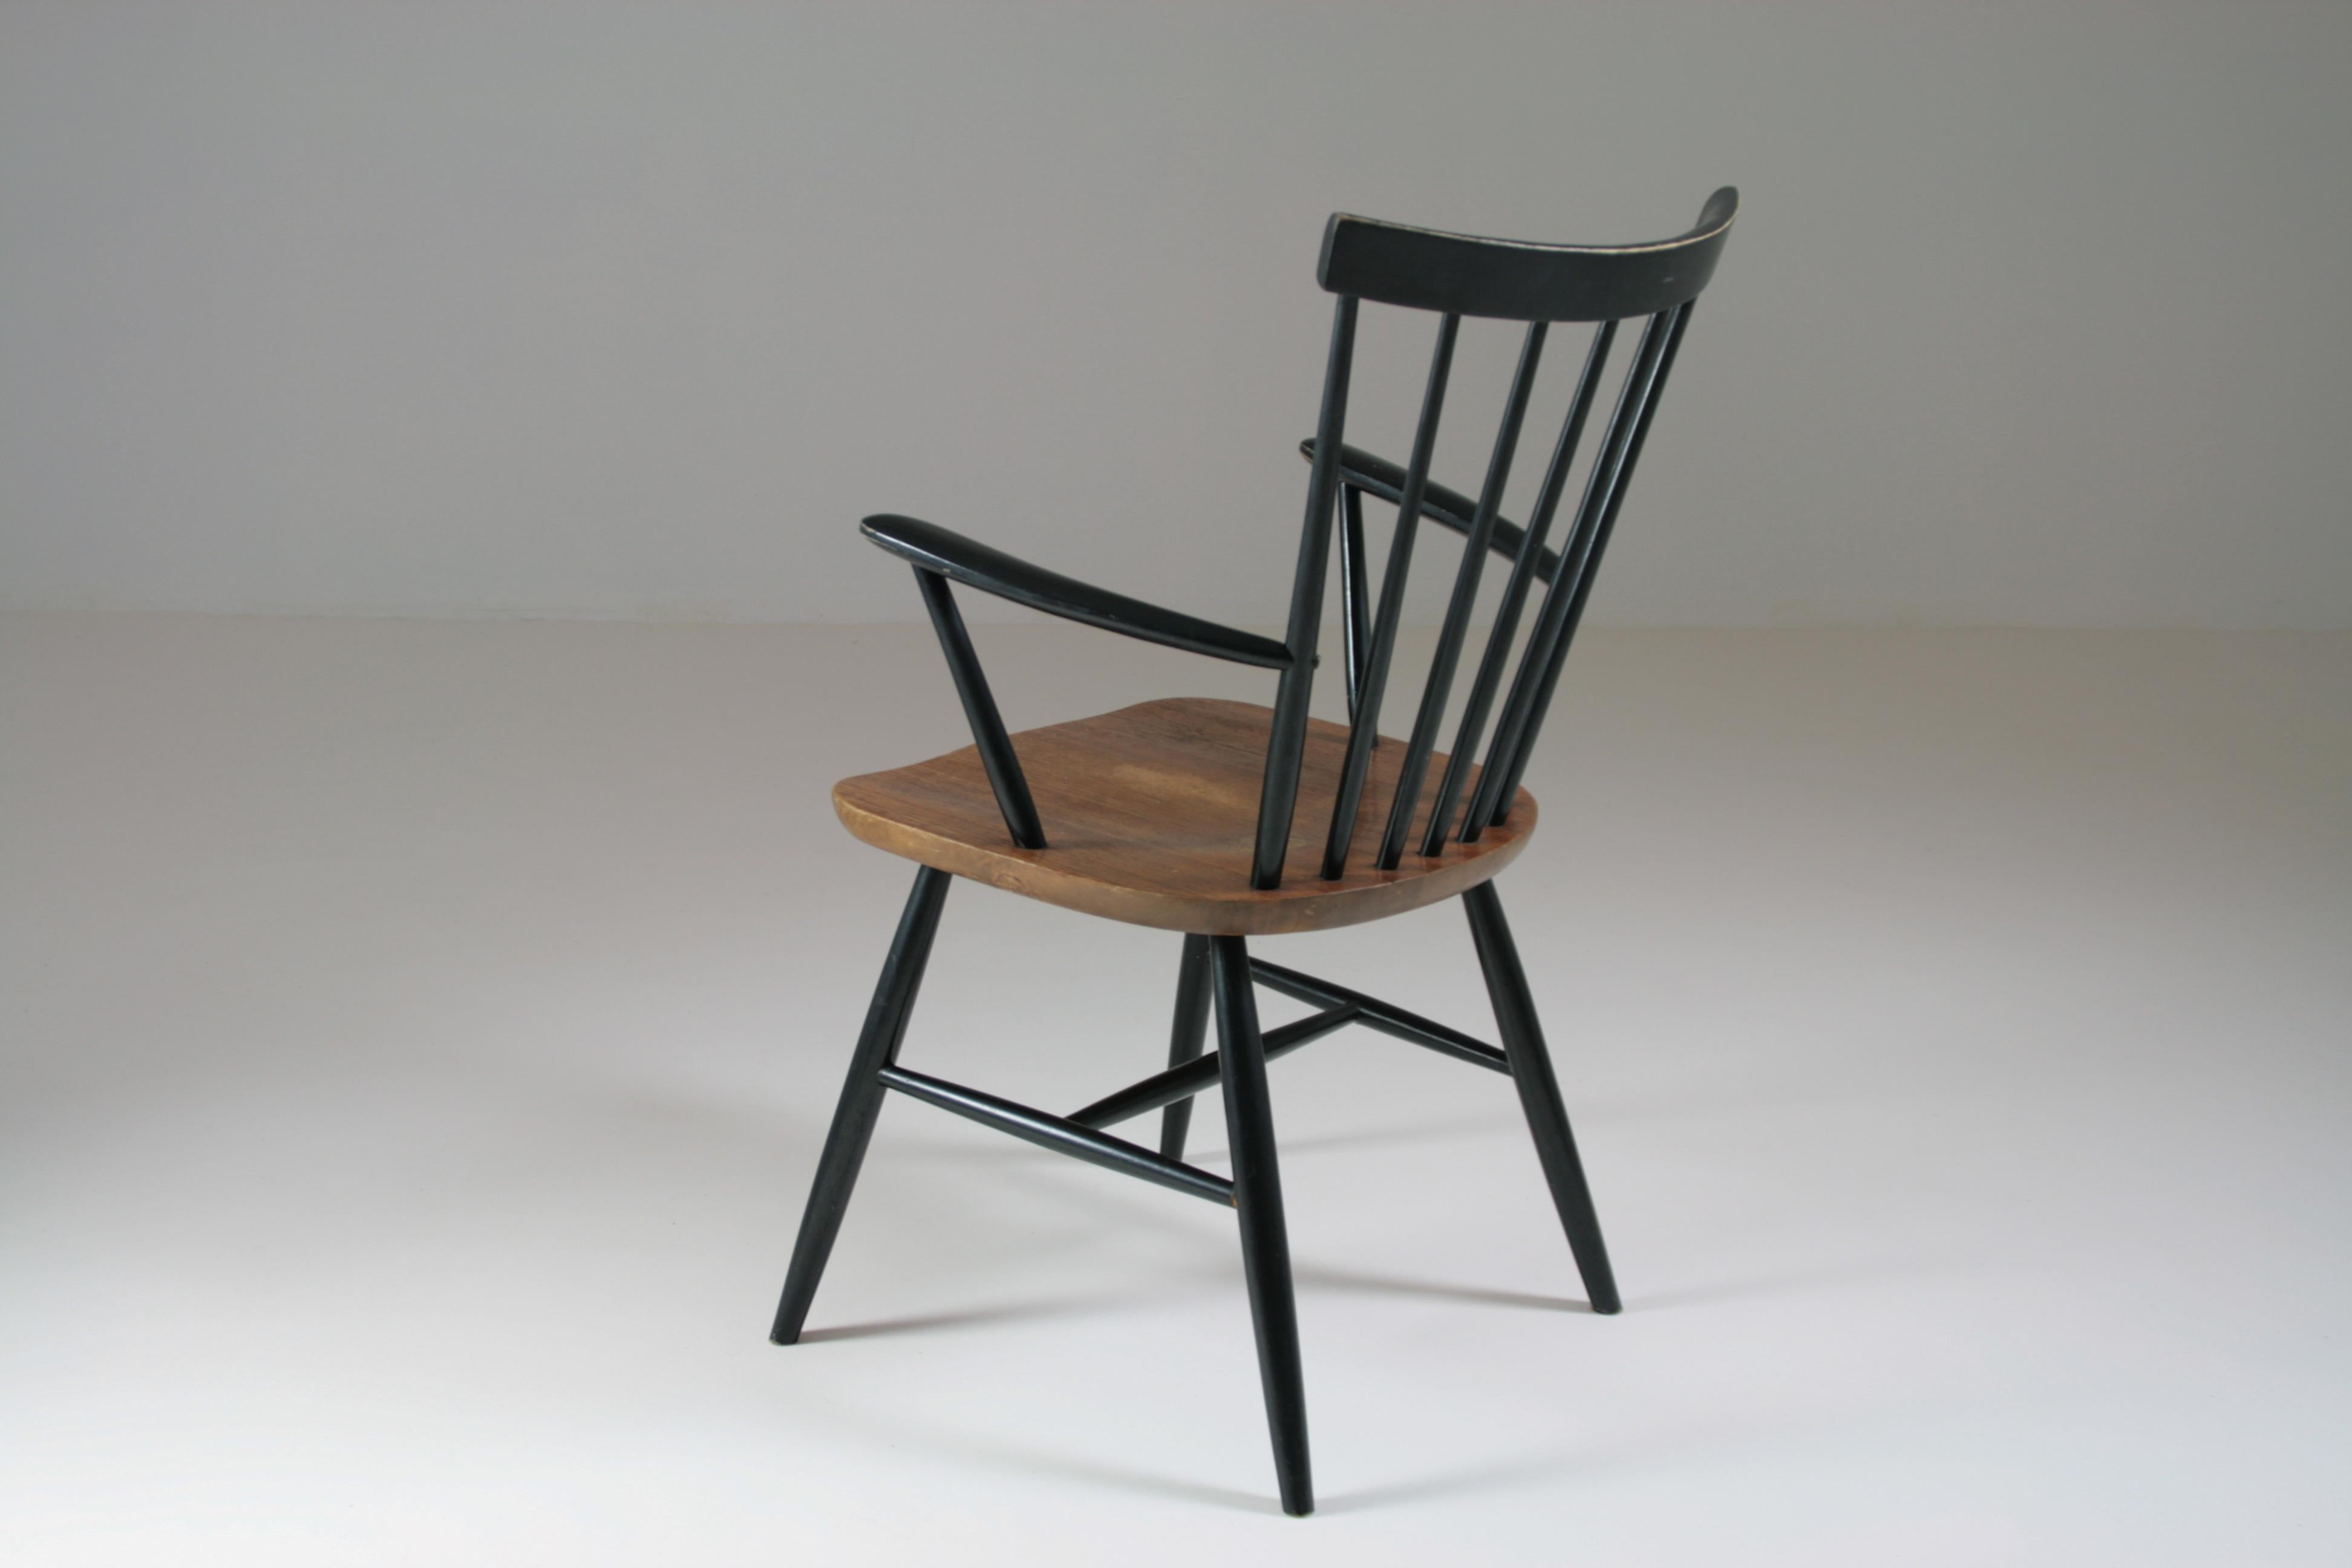 Armchair with bars by Ilmari Tapiovaara, Finland and dating from the 60s. Seat in teak and set of bars in black lacquered beech.
Dimensions: W56 x D46 x H88 cm
Seat height 45cm.